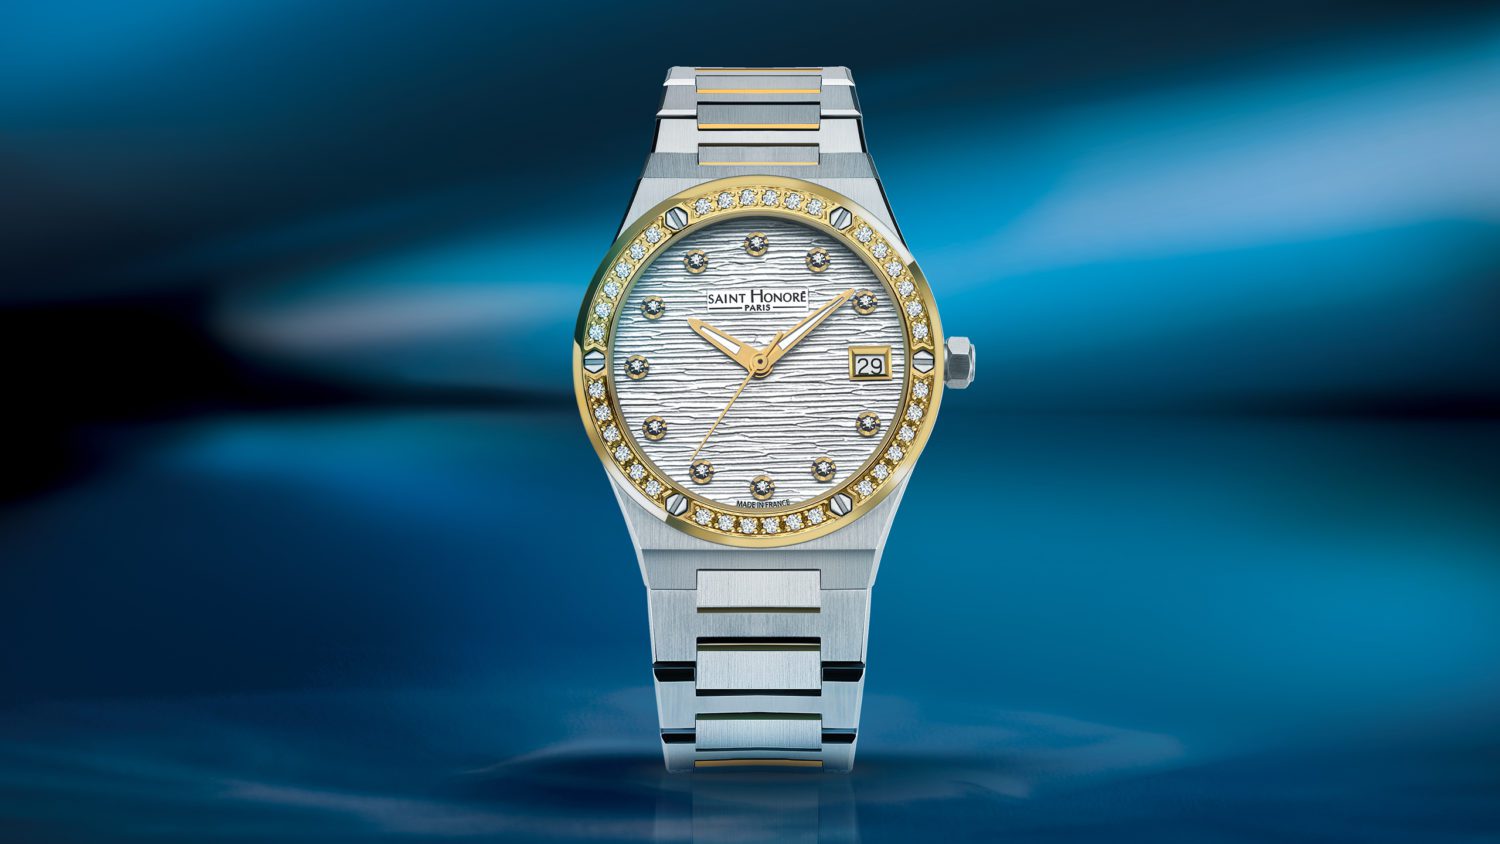 Haussmann Lady is anchored in the French heritage of watchmaking and embodies the true spirit of haute horlogerie.
Passed down from the French roots of watchmaking, it radiates confidence and elegance, perfectly aligned with today’s evolving fashion sense. Imbued with strength and feminine energy, the diamonds herald the undeniable beauty of the watch. The watch casts a spell of priceless elegance, marked by its unmistakable design and brilliant details. Encapsulating the beauty of freedom, Haussmann Lady reflects the inner strength and shining passion of each woman.
